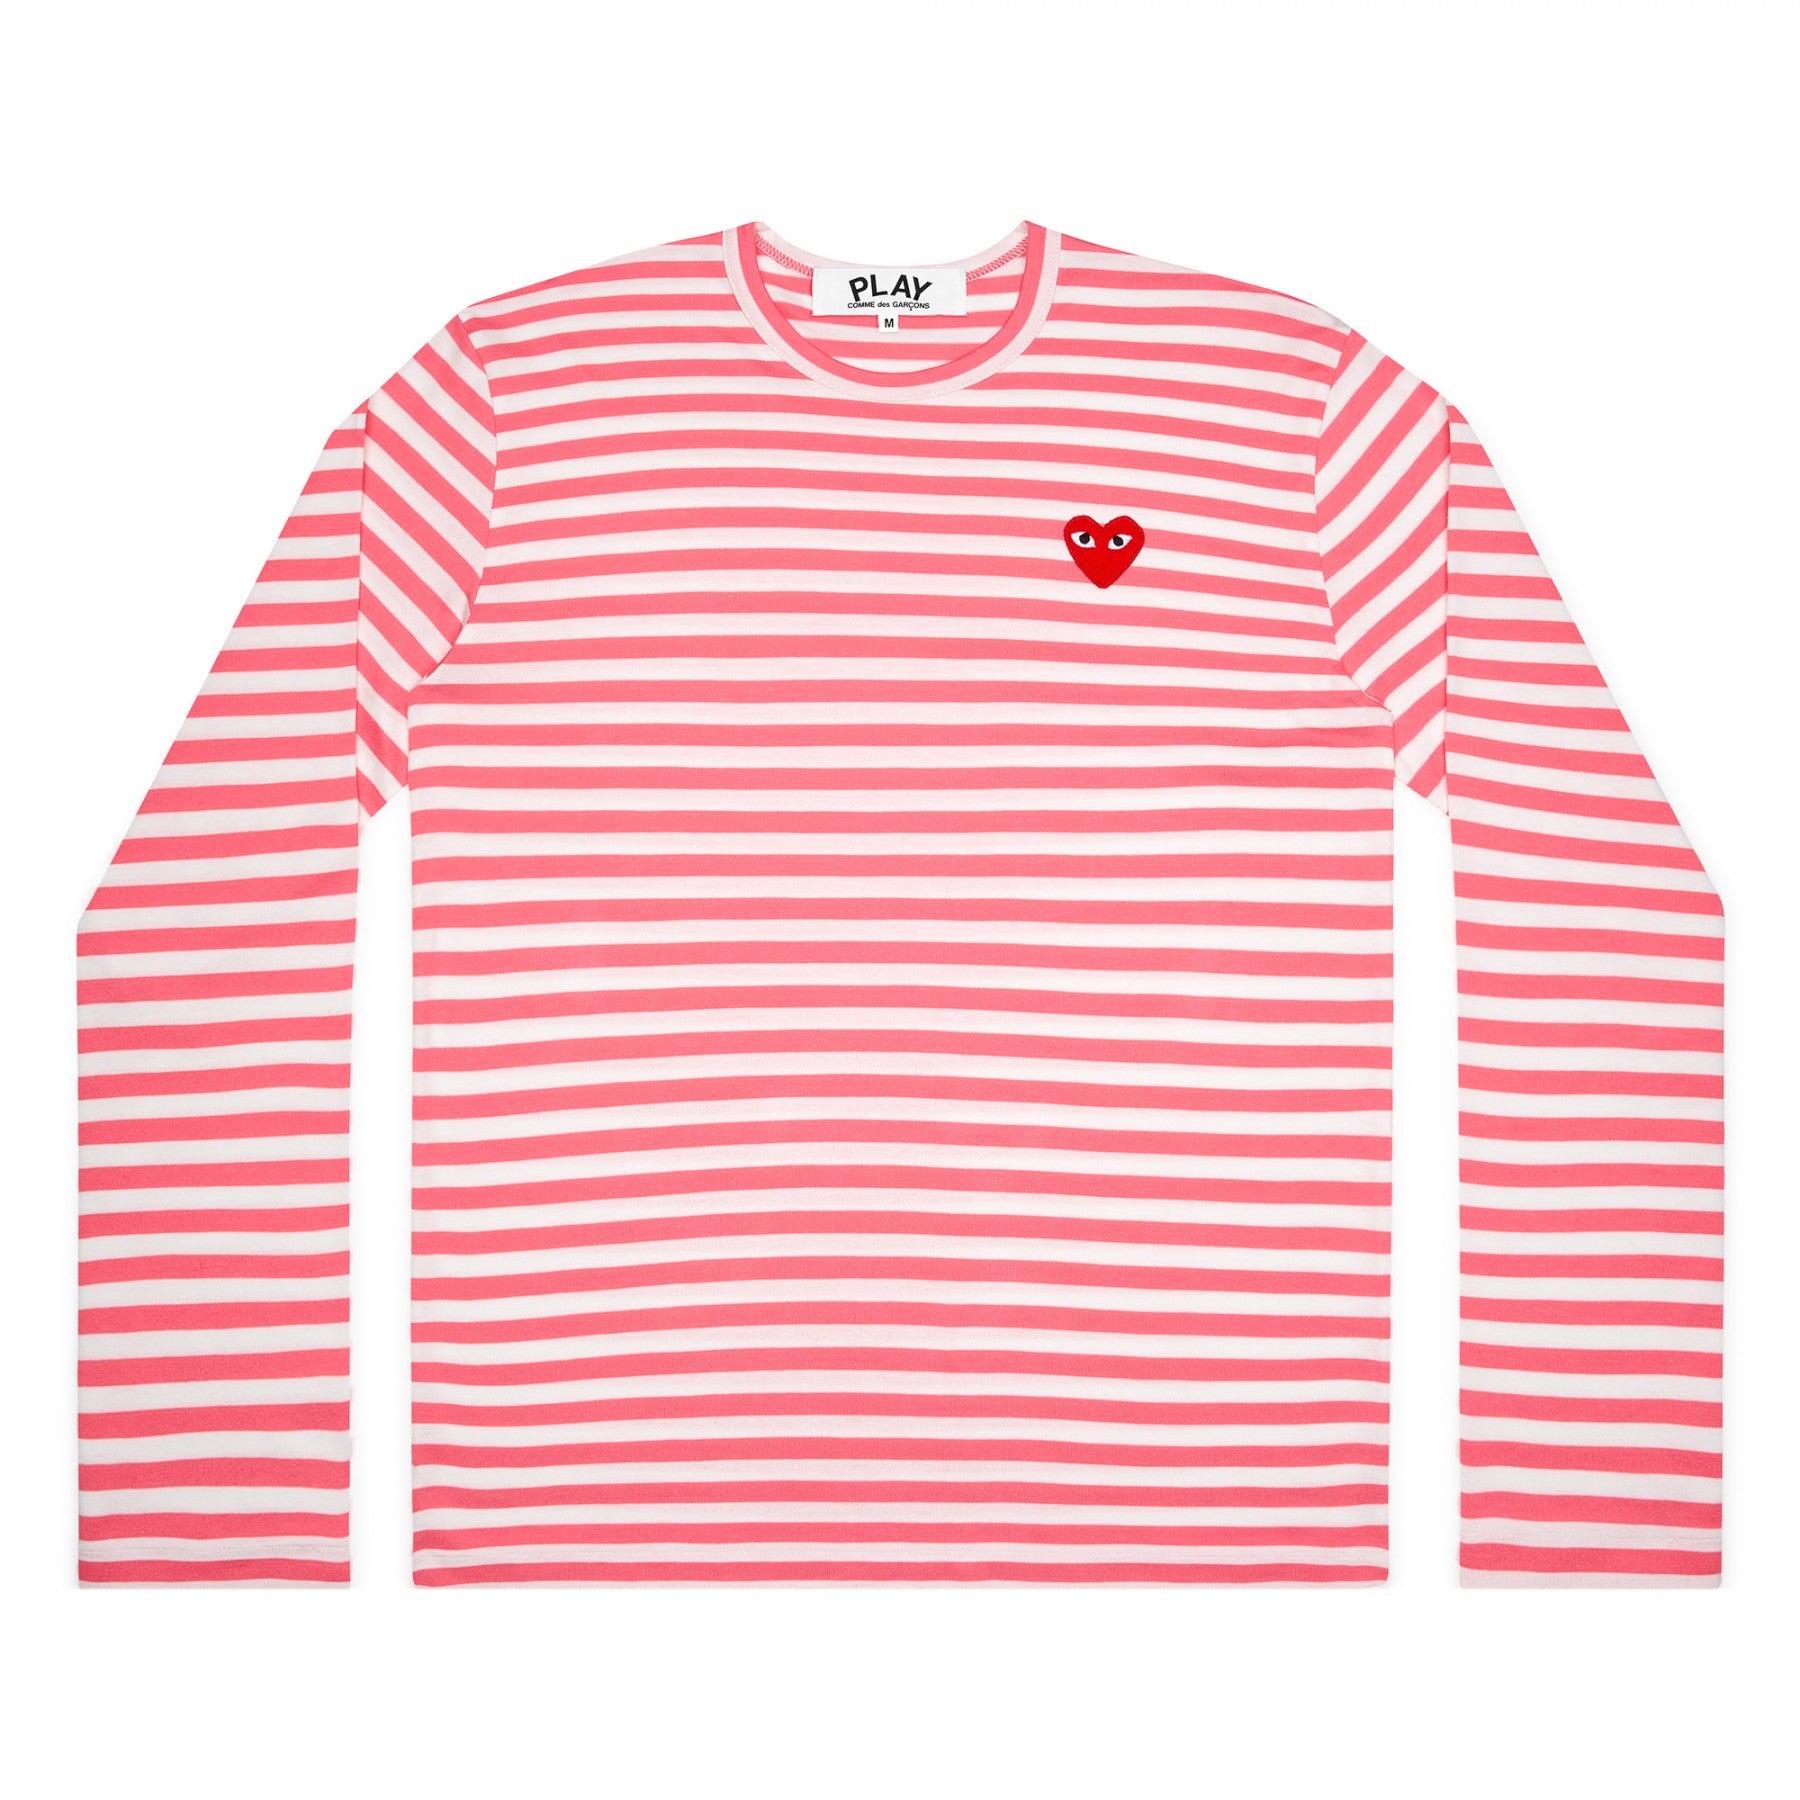 PLAY L/S Coloured Striped Red Emblem Spring Series (Pink)